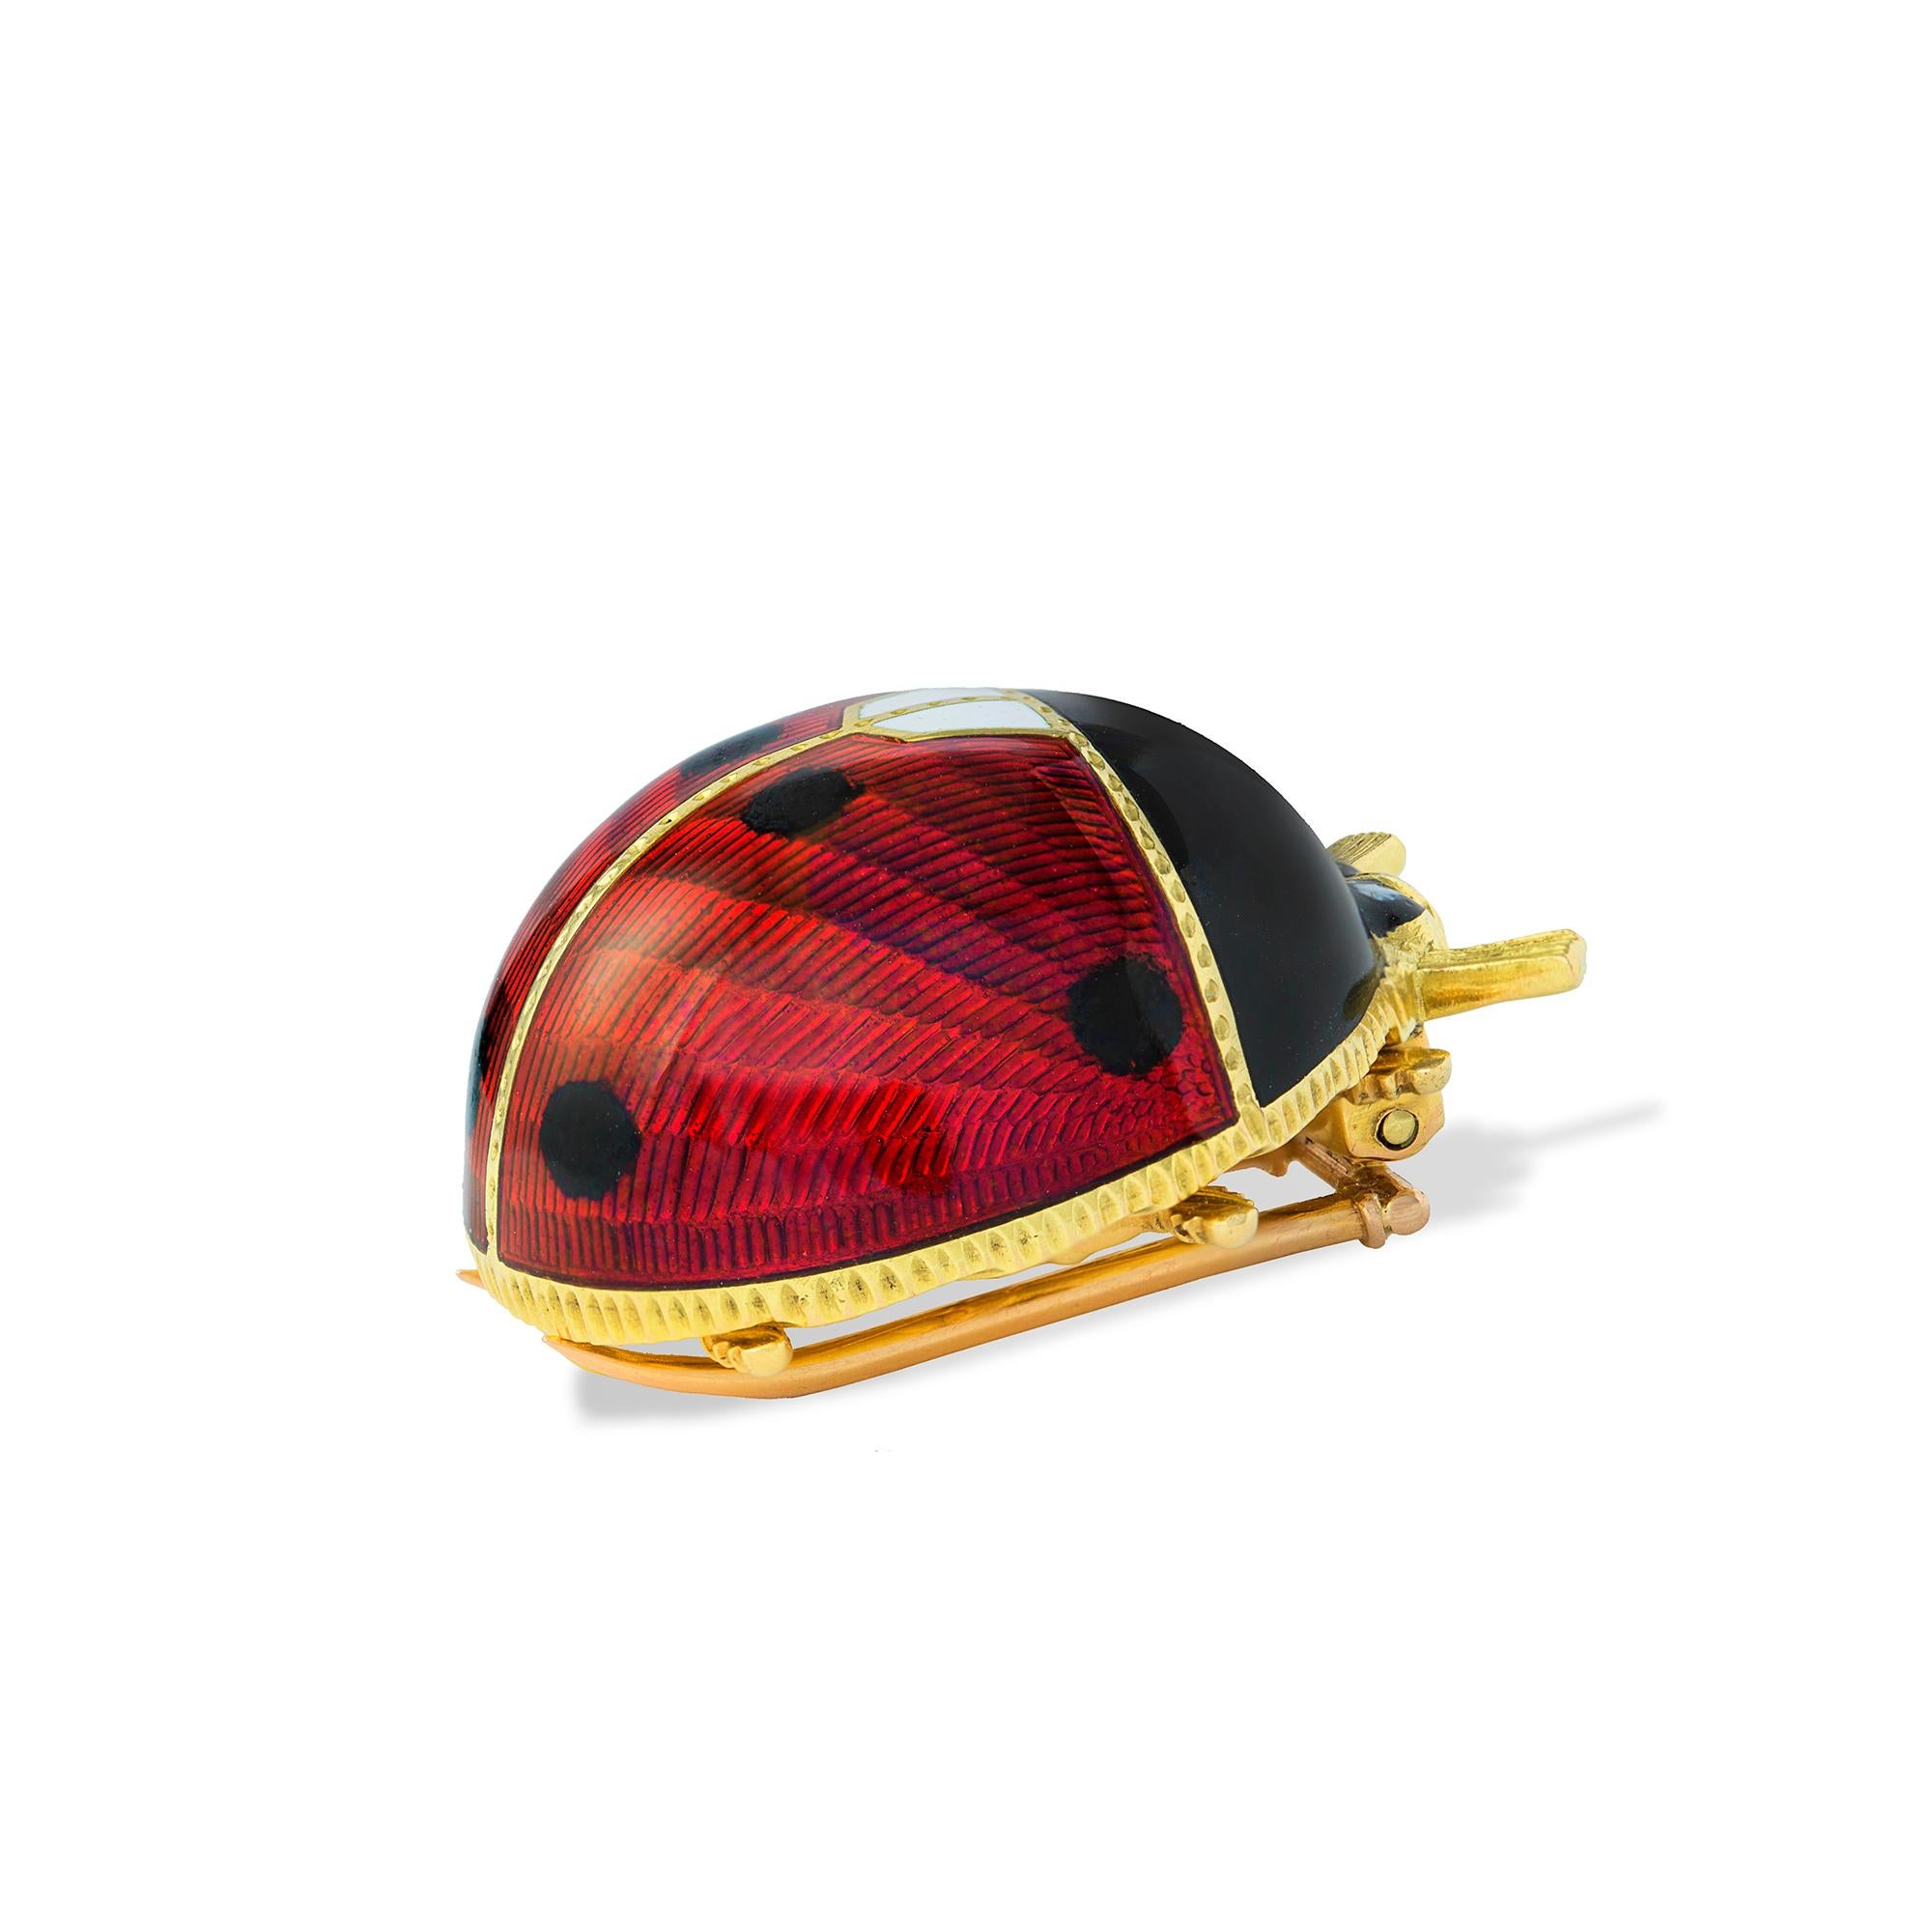 A guilloché enamel ladybird brooch, the red, black and white enamelled body, all to a yellow gold mount with pin brooch fitting, marked 18ct gold, Italy, circa 1960, measuring approximately 2.7 cm in diameter gross weight 18.00 grams.

This brooch